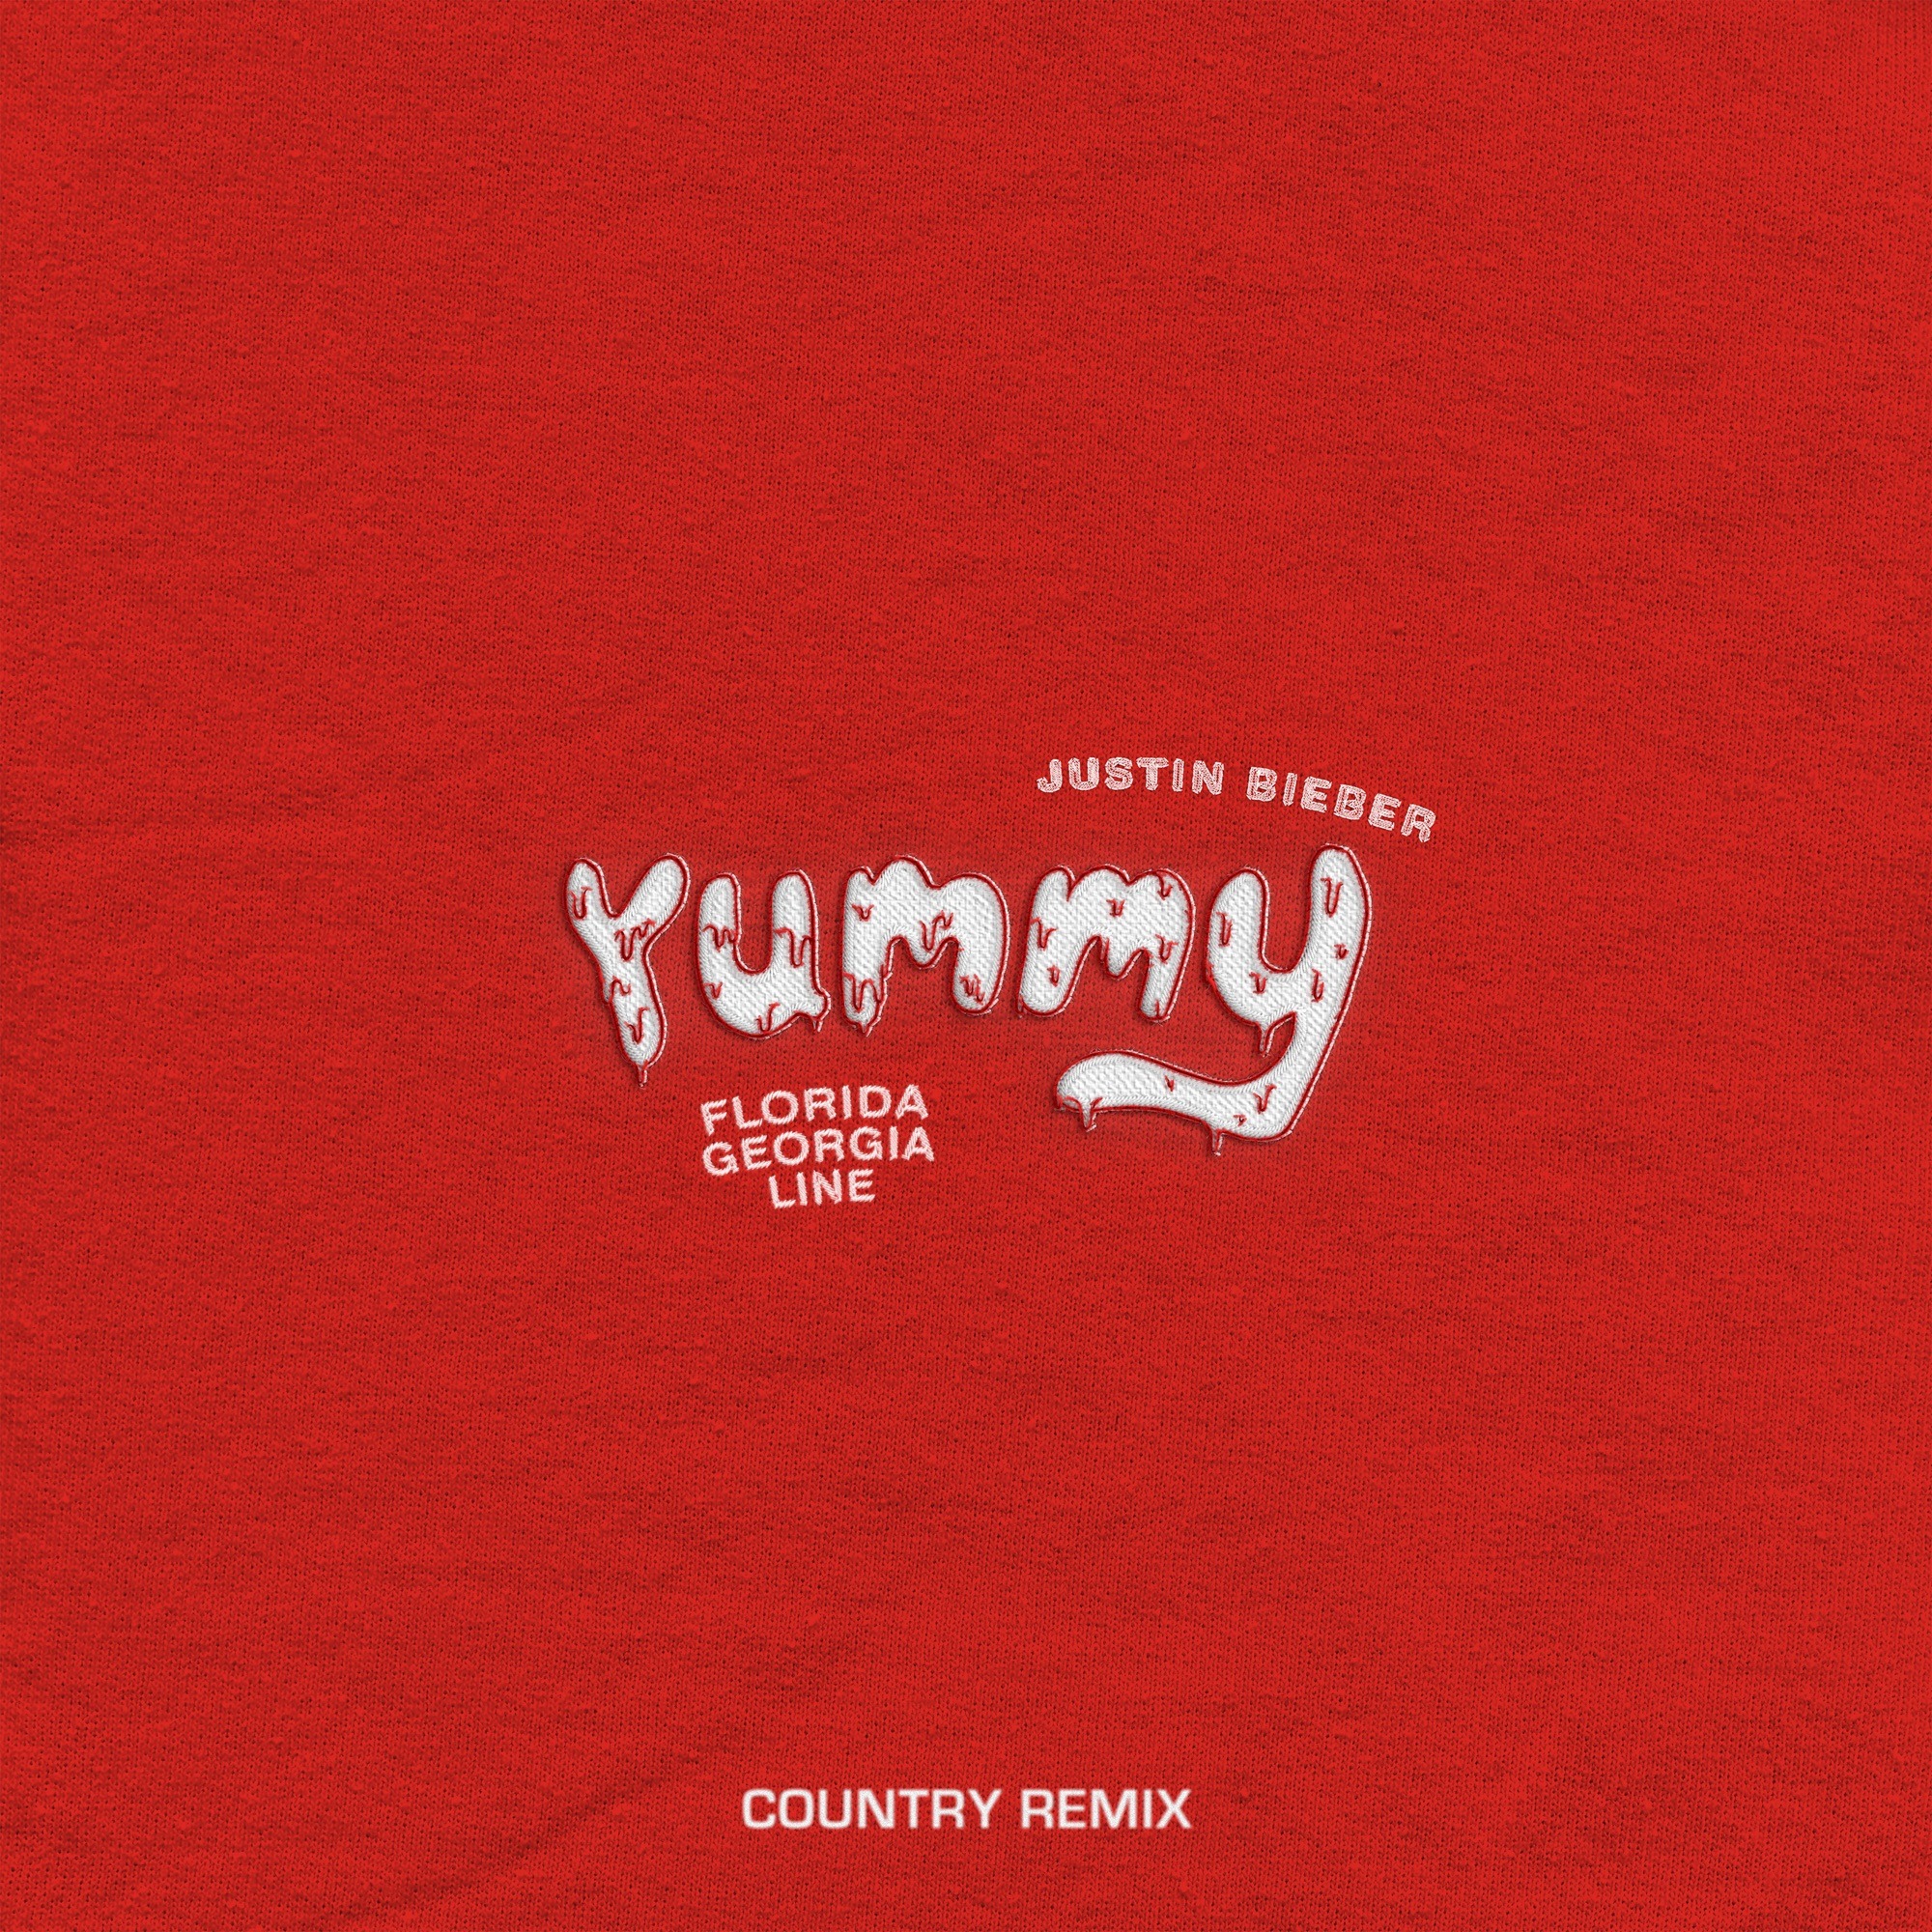 Song By Justin Bieber Feat Florida Georgia Line Called Yummy